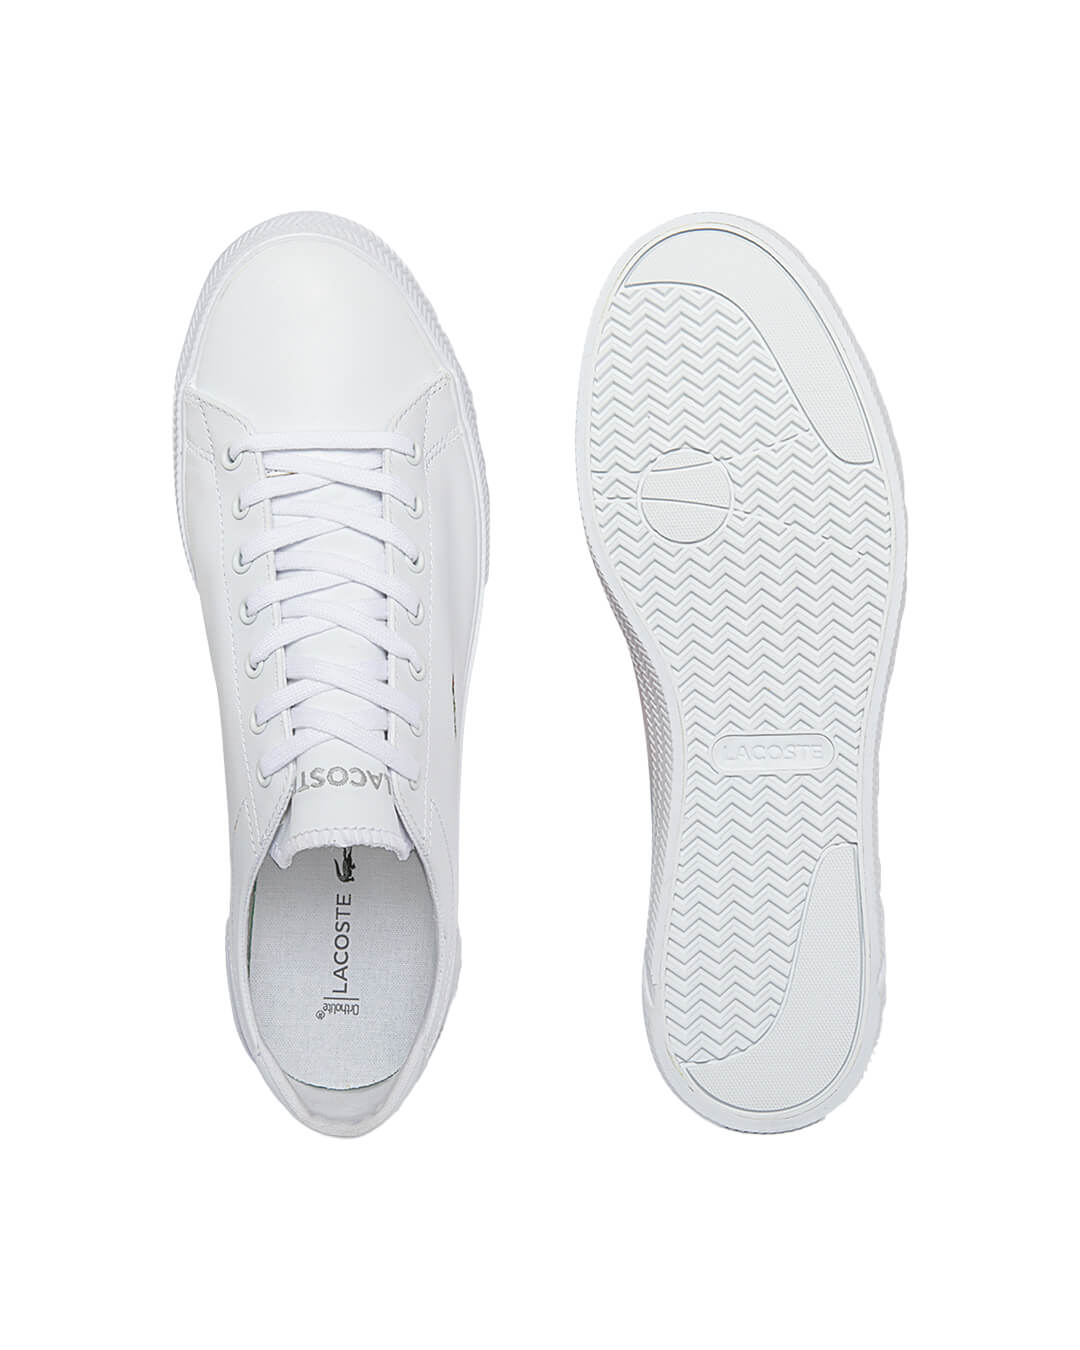 Lacoste Shoes Lacoste White Gripshot Leather Sneakers